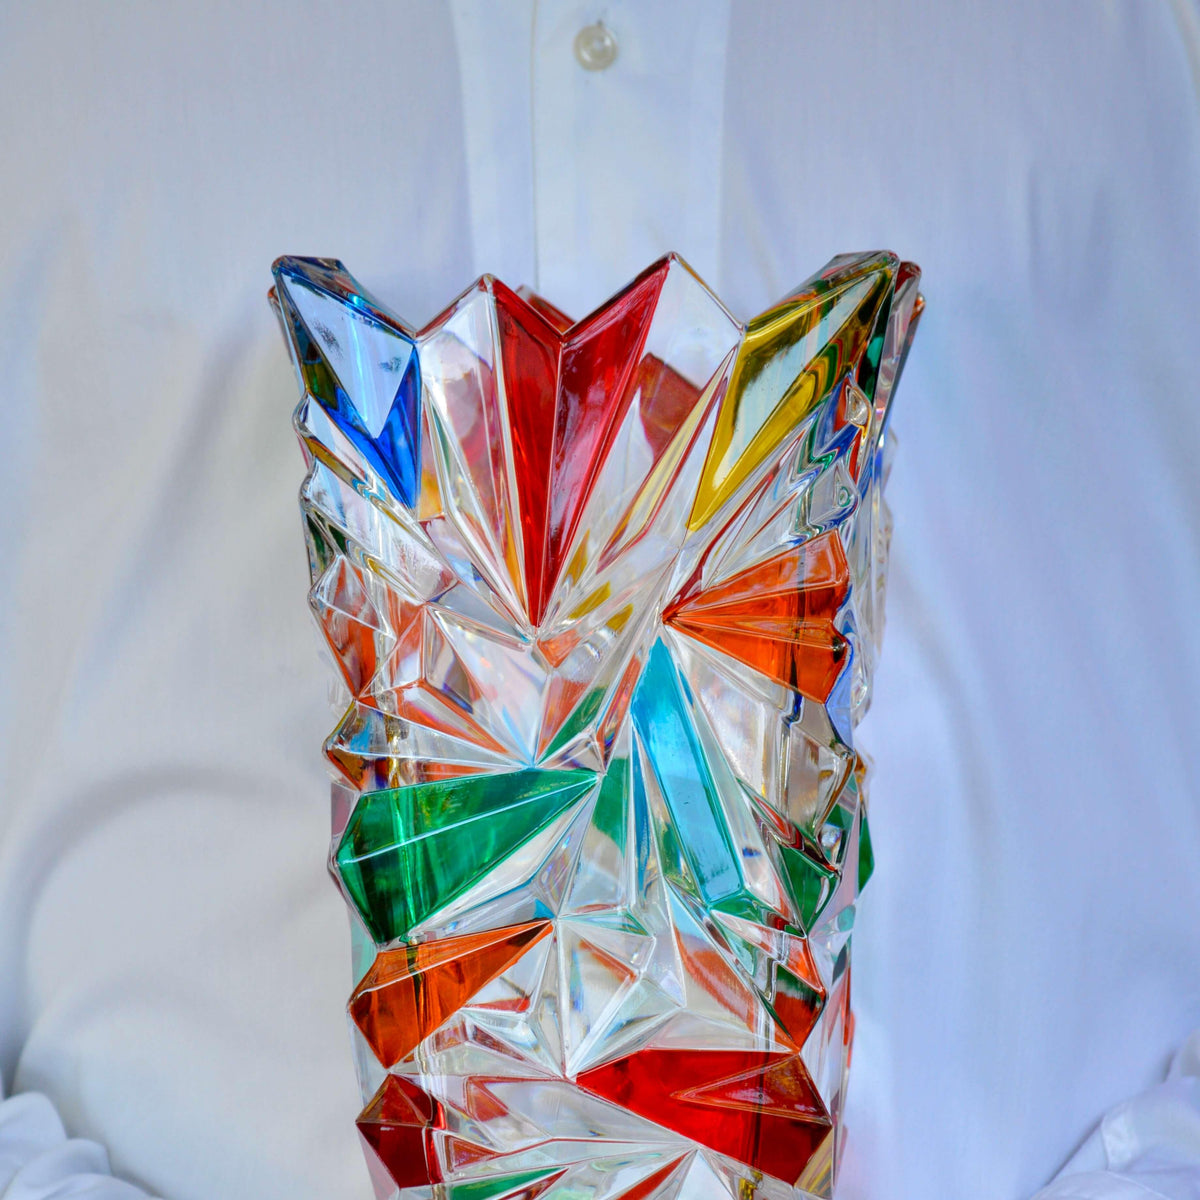 Bolt, Murano Glass Large Painted Vase, Made in Italy at MyItalianDecor